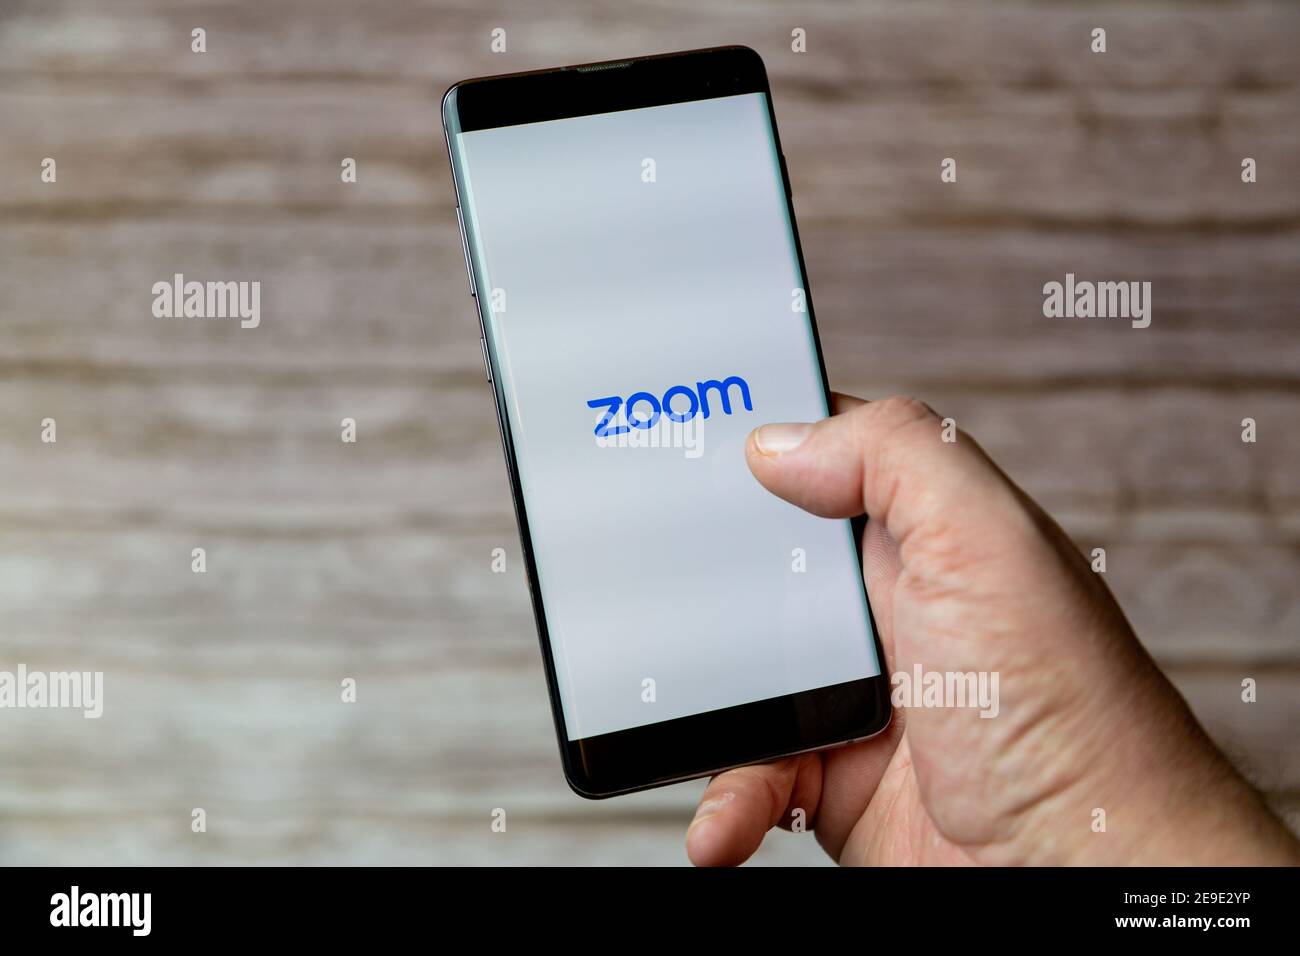 A hand holding a Mobile phone or cell phone with the Zoom calling app on screen Stock Photo